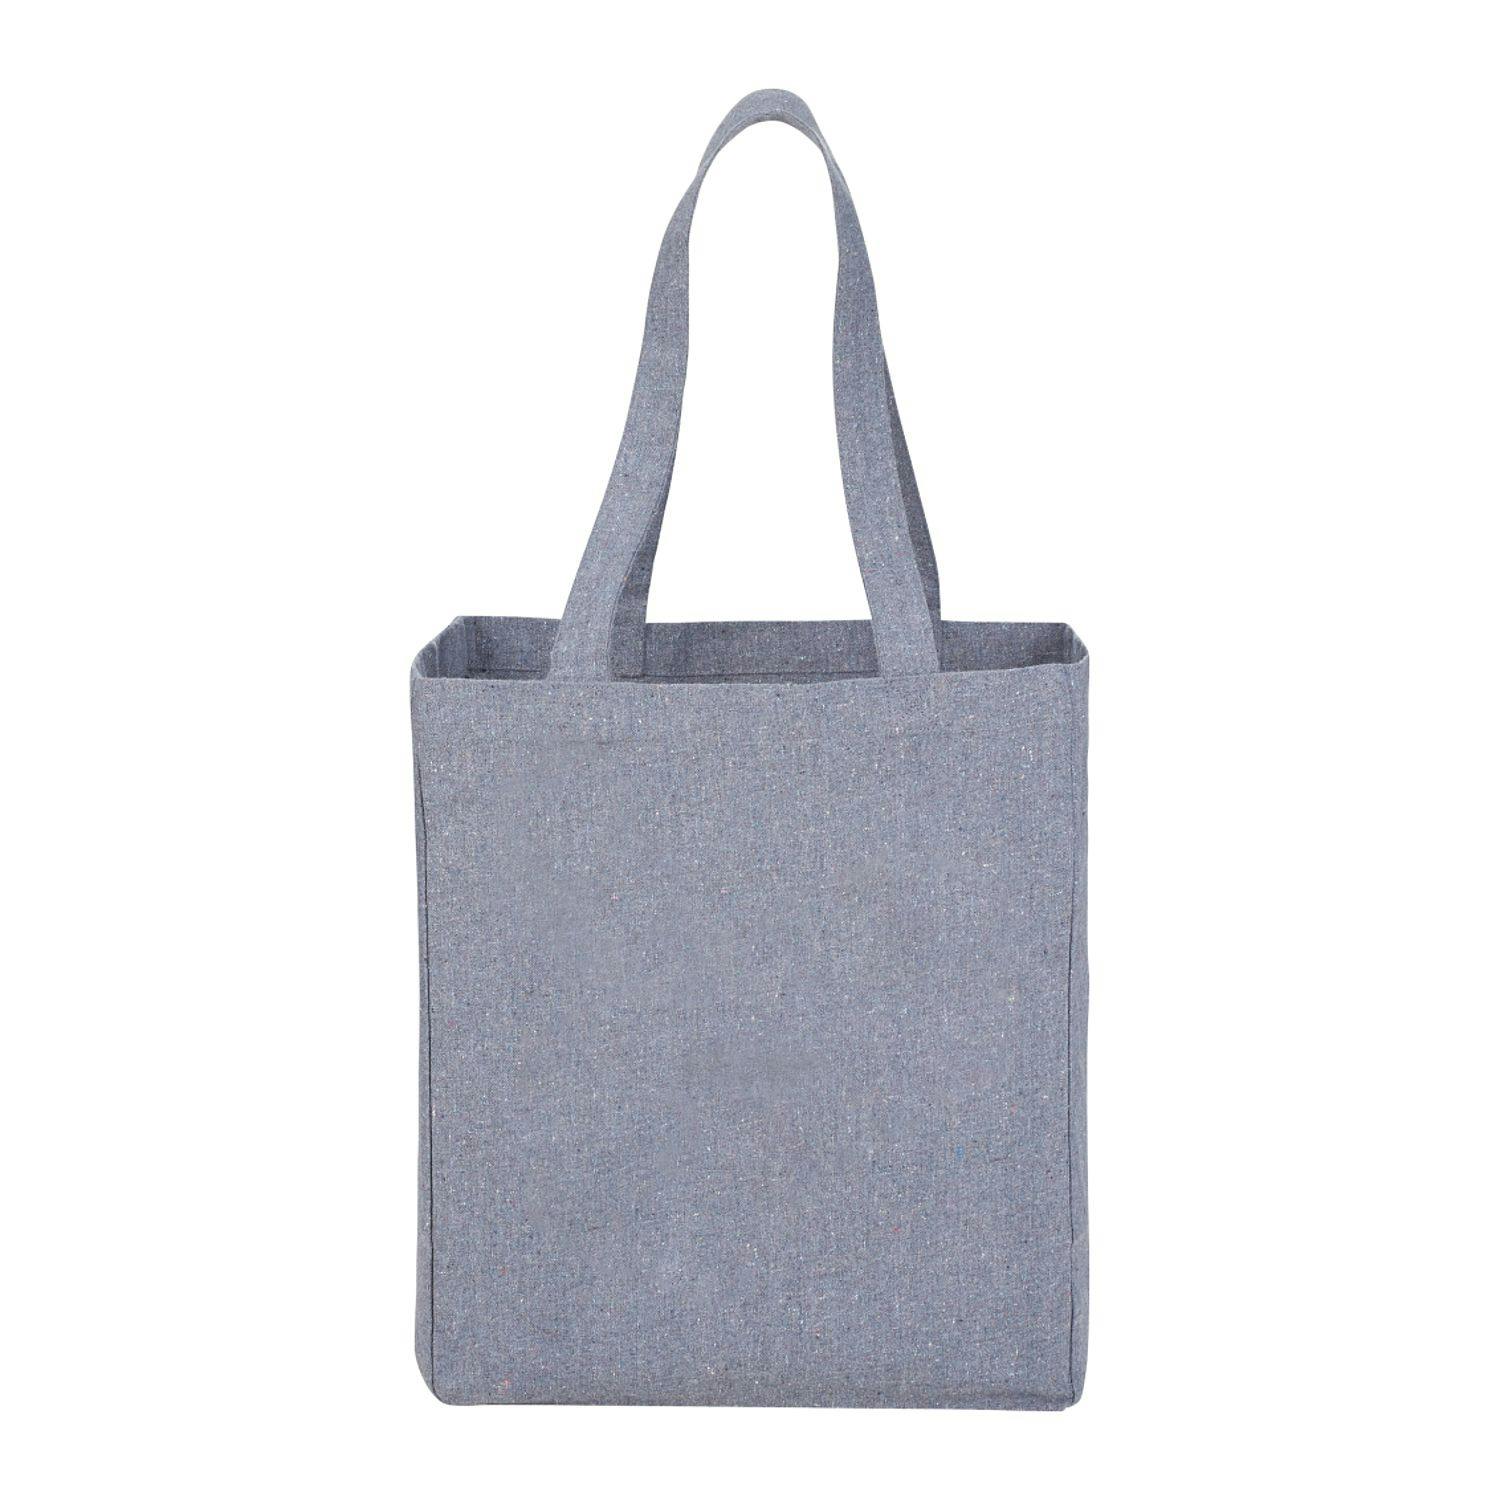 Recycled Cotton Grocery Tote - additional Image 1